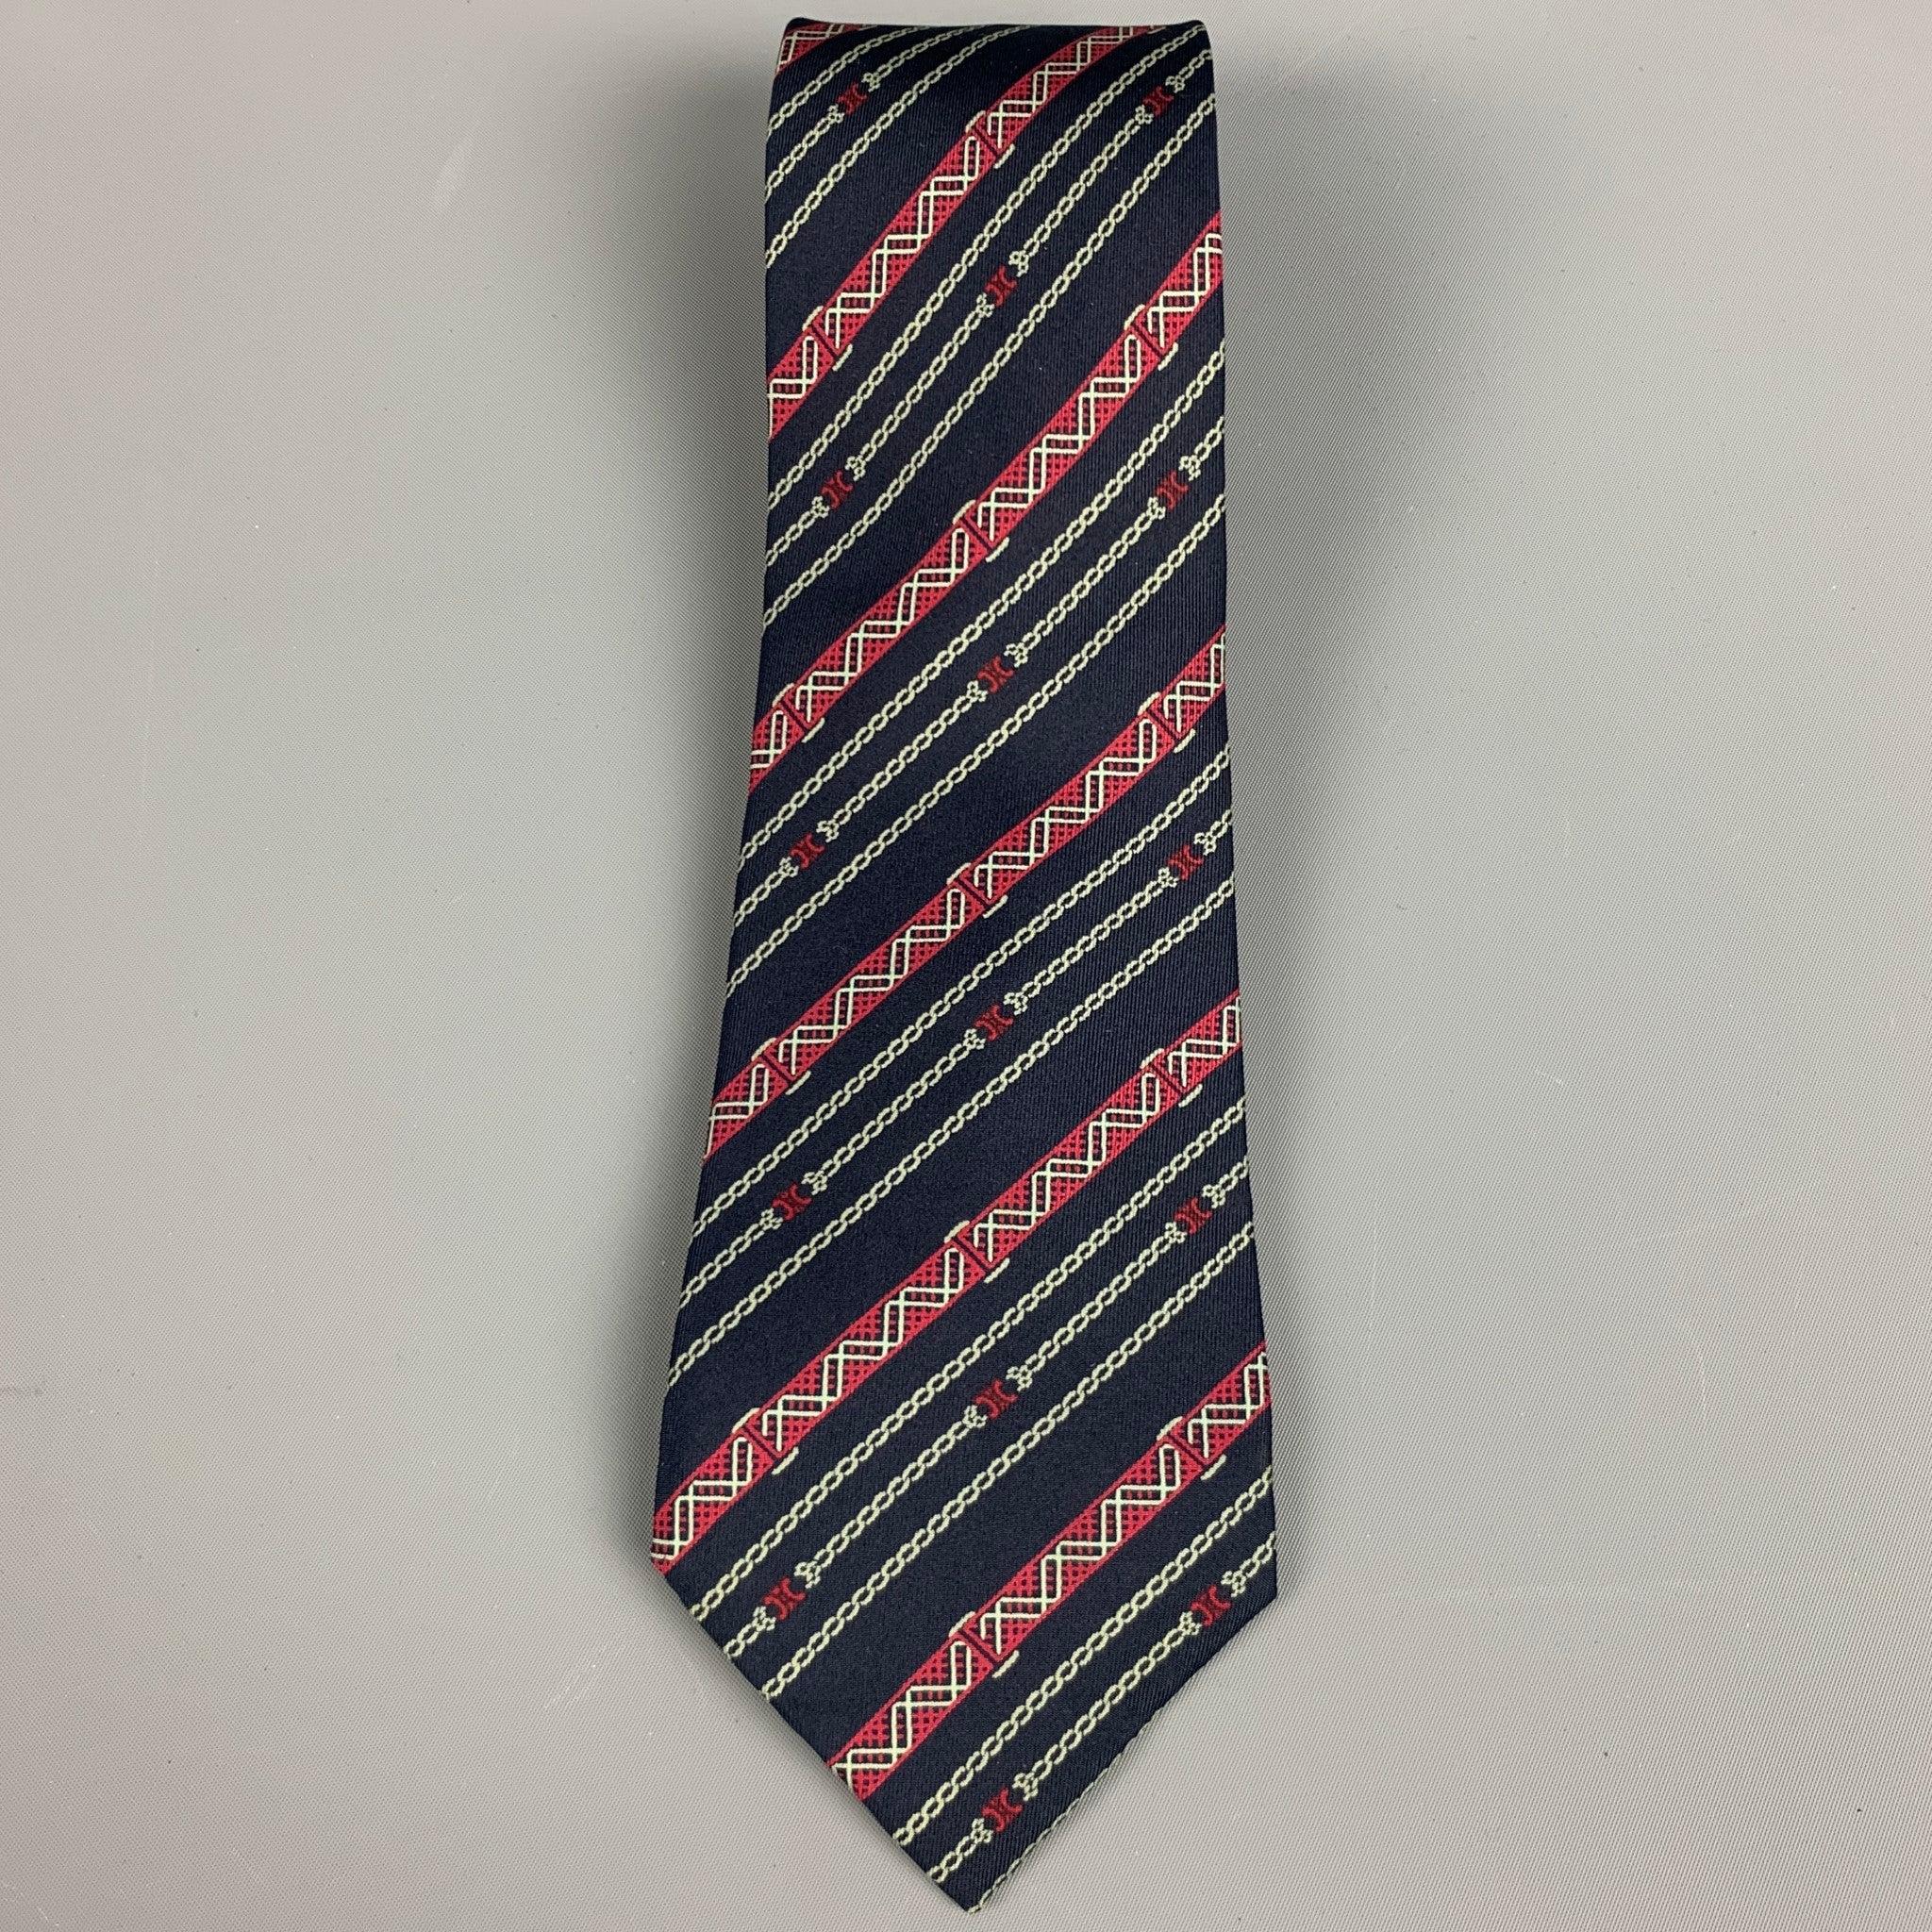 CELINE
necktie in a navy silk fabric featuring red diagonal chain link stripe pattern. Handmade in Spainches Excellent Pre-Owned Condition. 

Measurements: 
  Width: 3.5 inches Length: 58 inches 
  
  
 
Reference: 128076
Category: Tie
More Details
